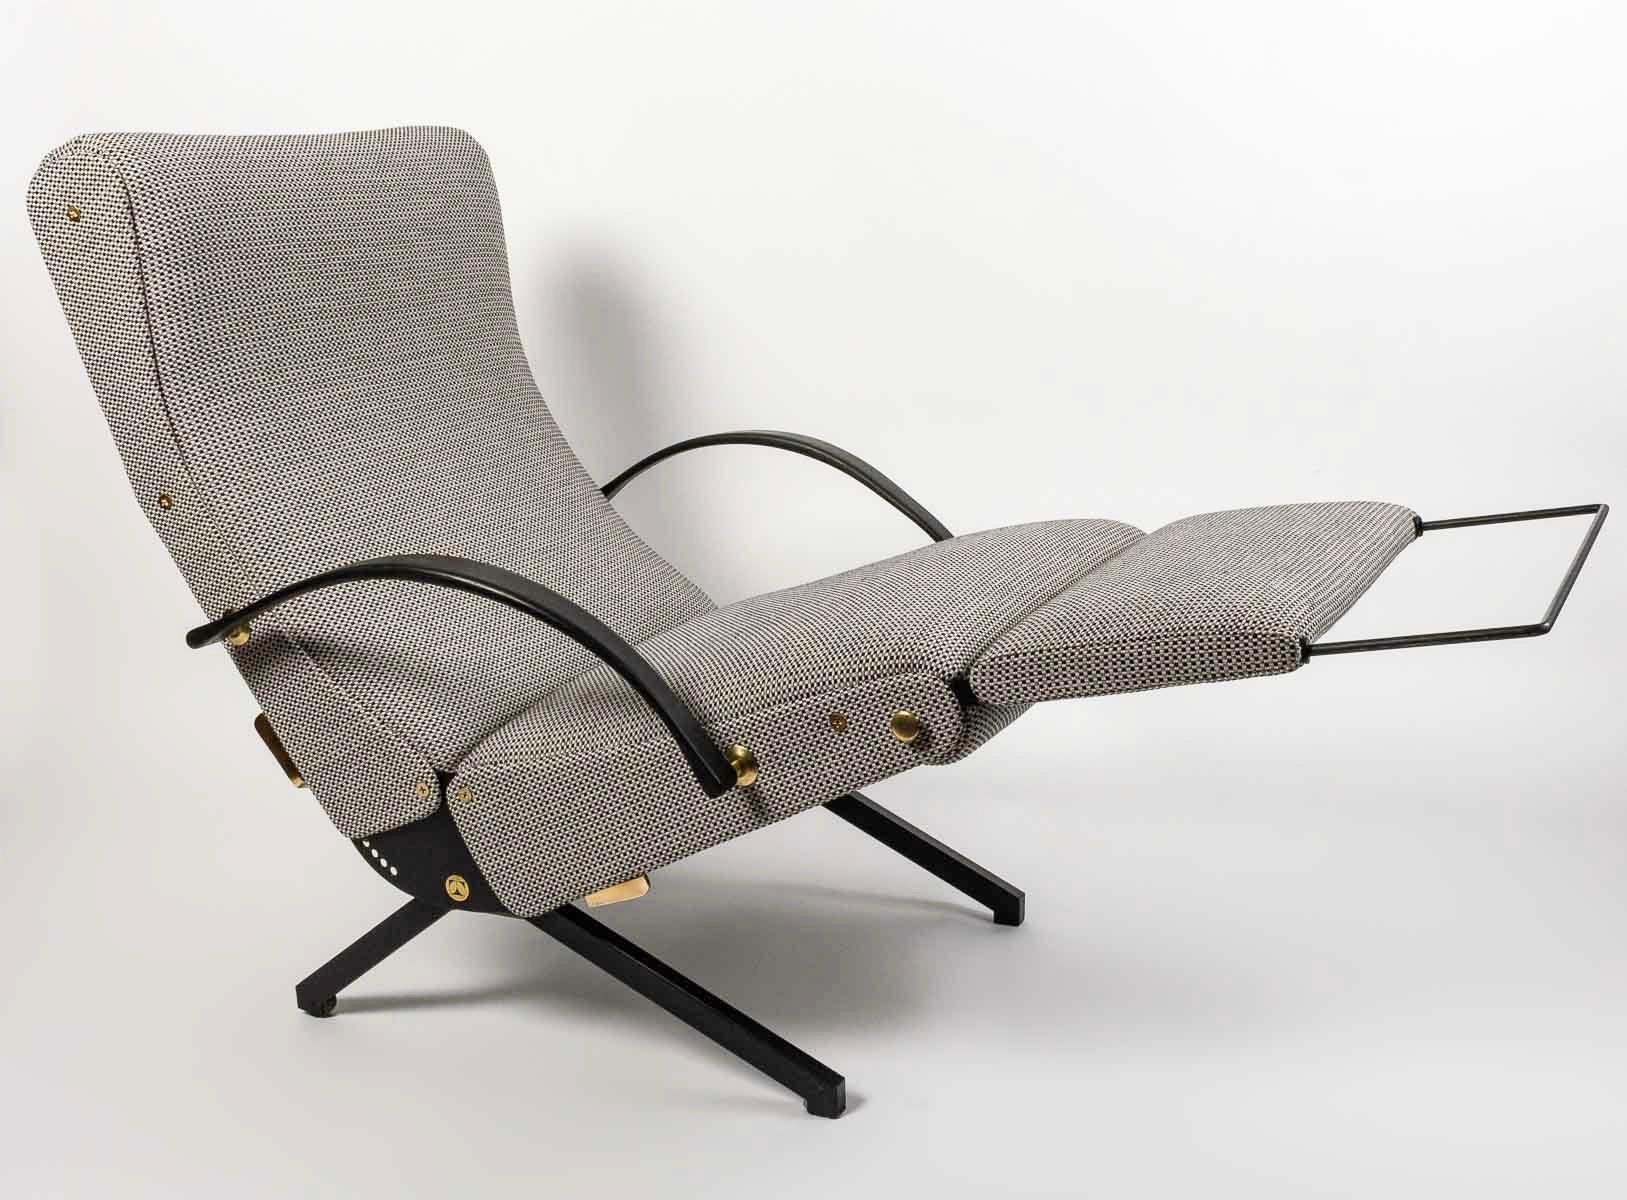 1950 Osvaldo Borsani, Relax armchair P40 1st Edition

Armchair P40 1st Edition Osvaldo Borsani from 1954 
Cover redone in the original spirit.
Model in Jab tranquility fabric.
Structure in tubular iron. 
Two brass handles to adjust the back